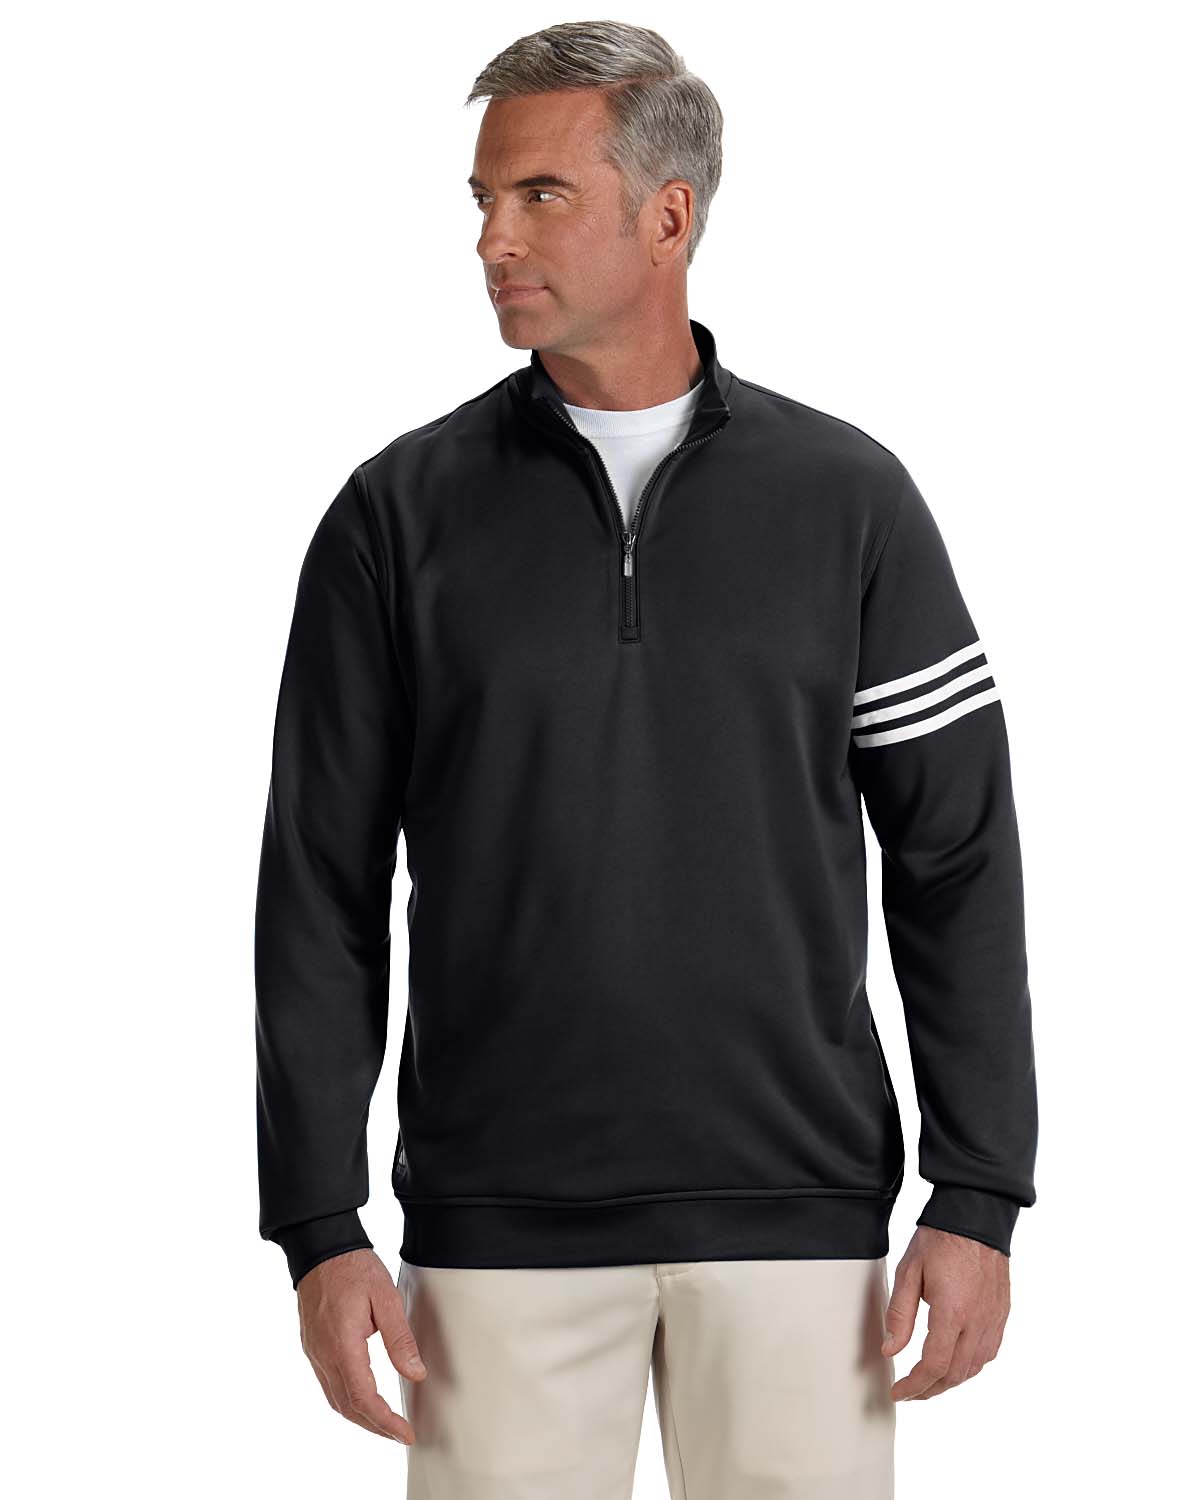 adidas climalite 1 4 zip pullover